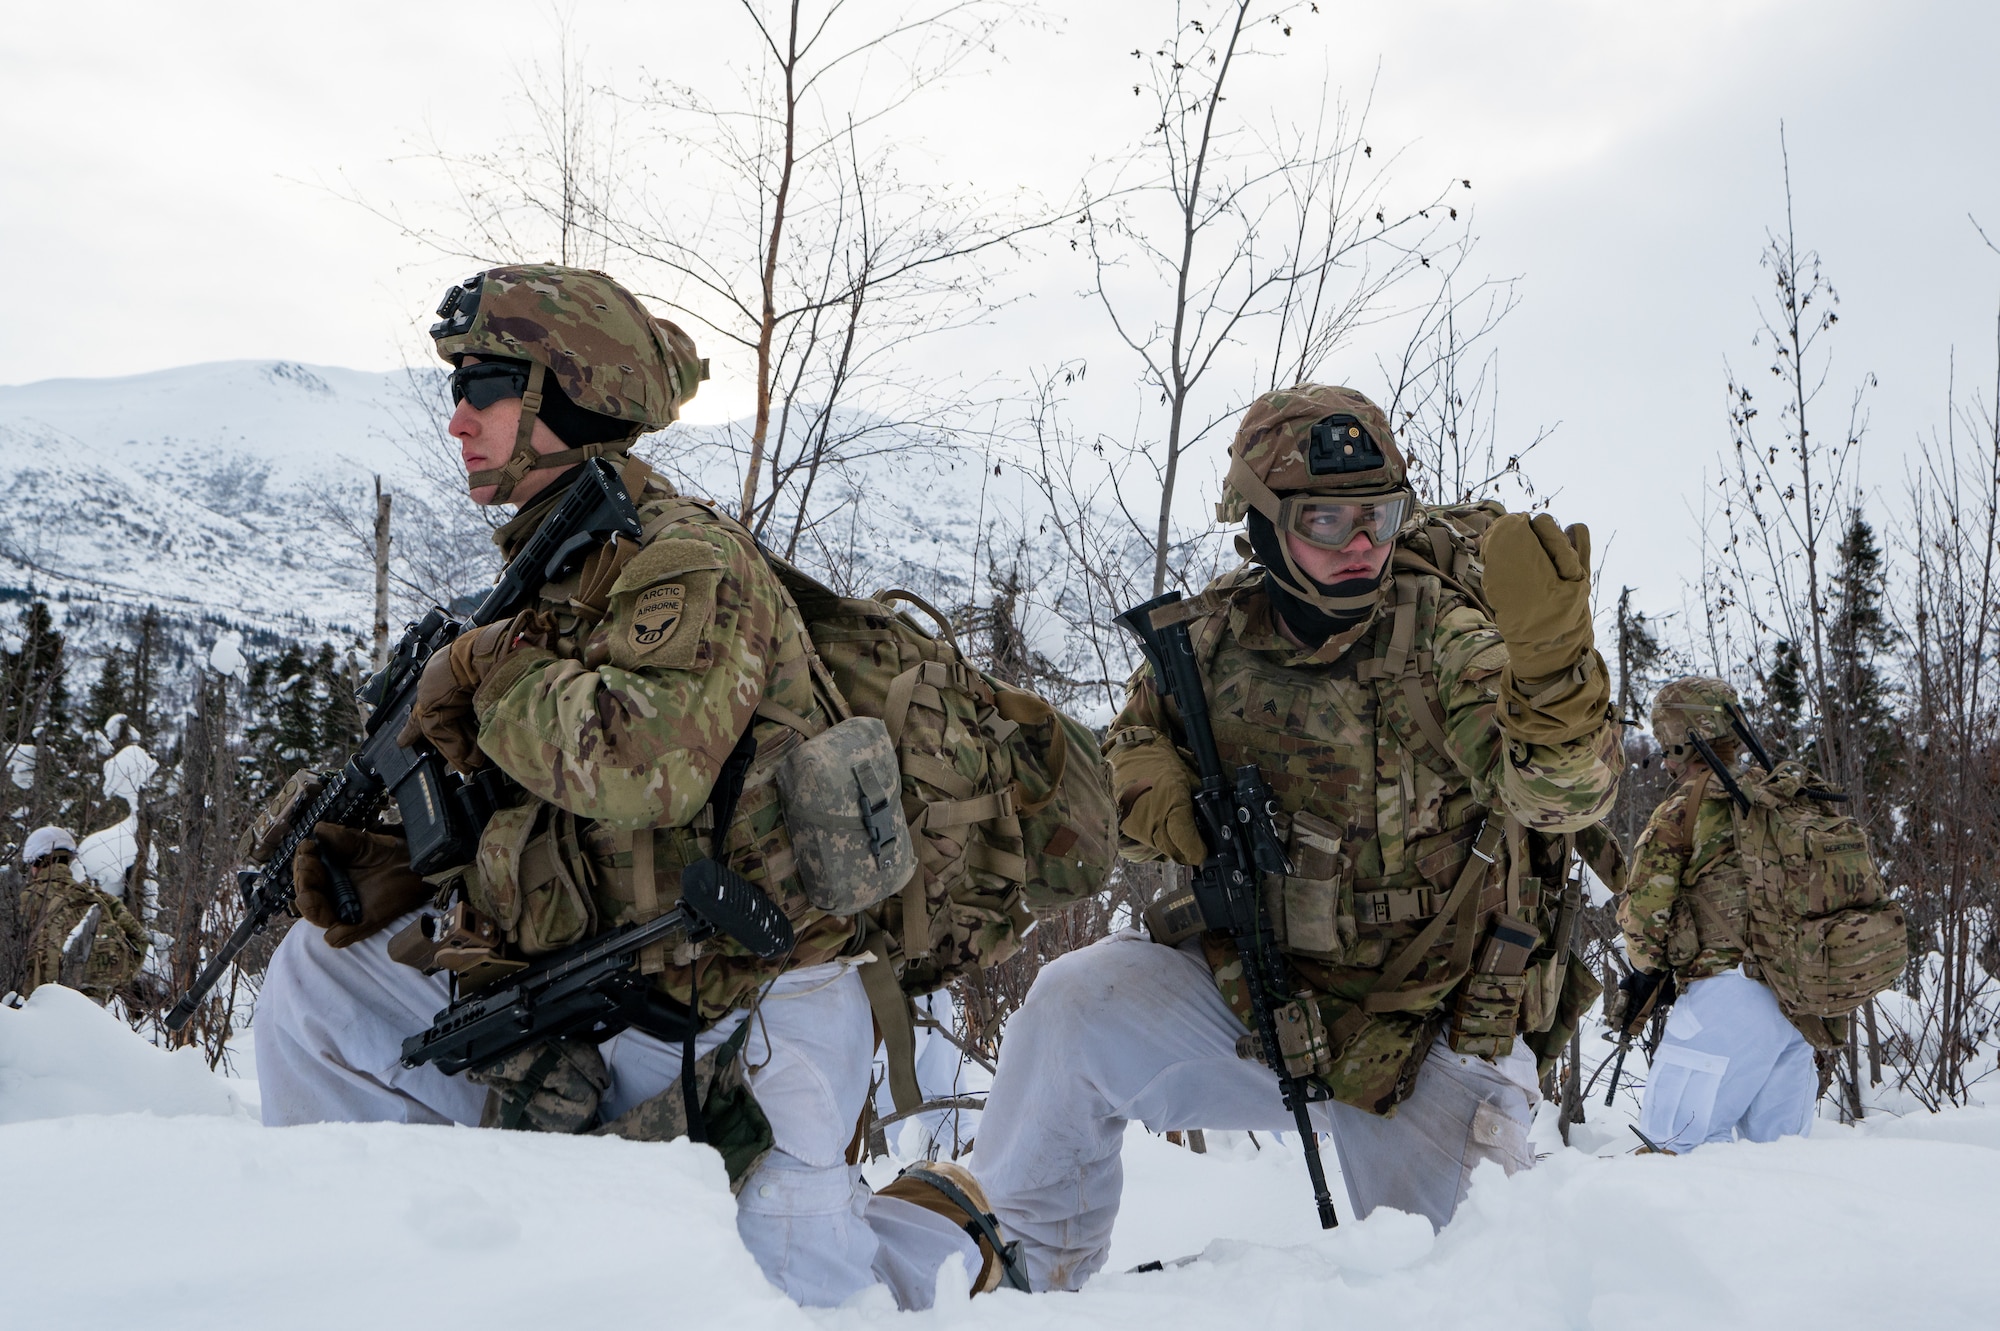 A photo of Soldiers holding watch in the snow